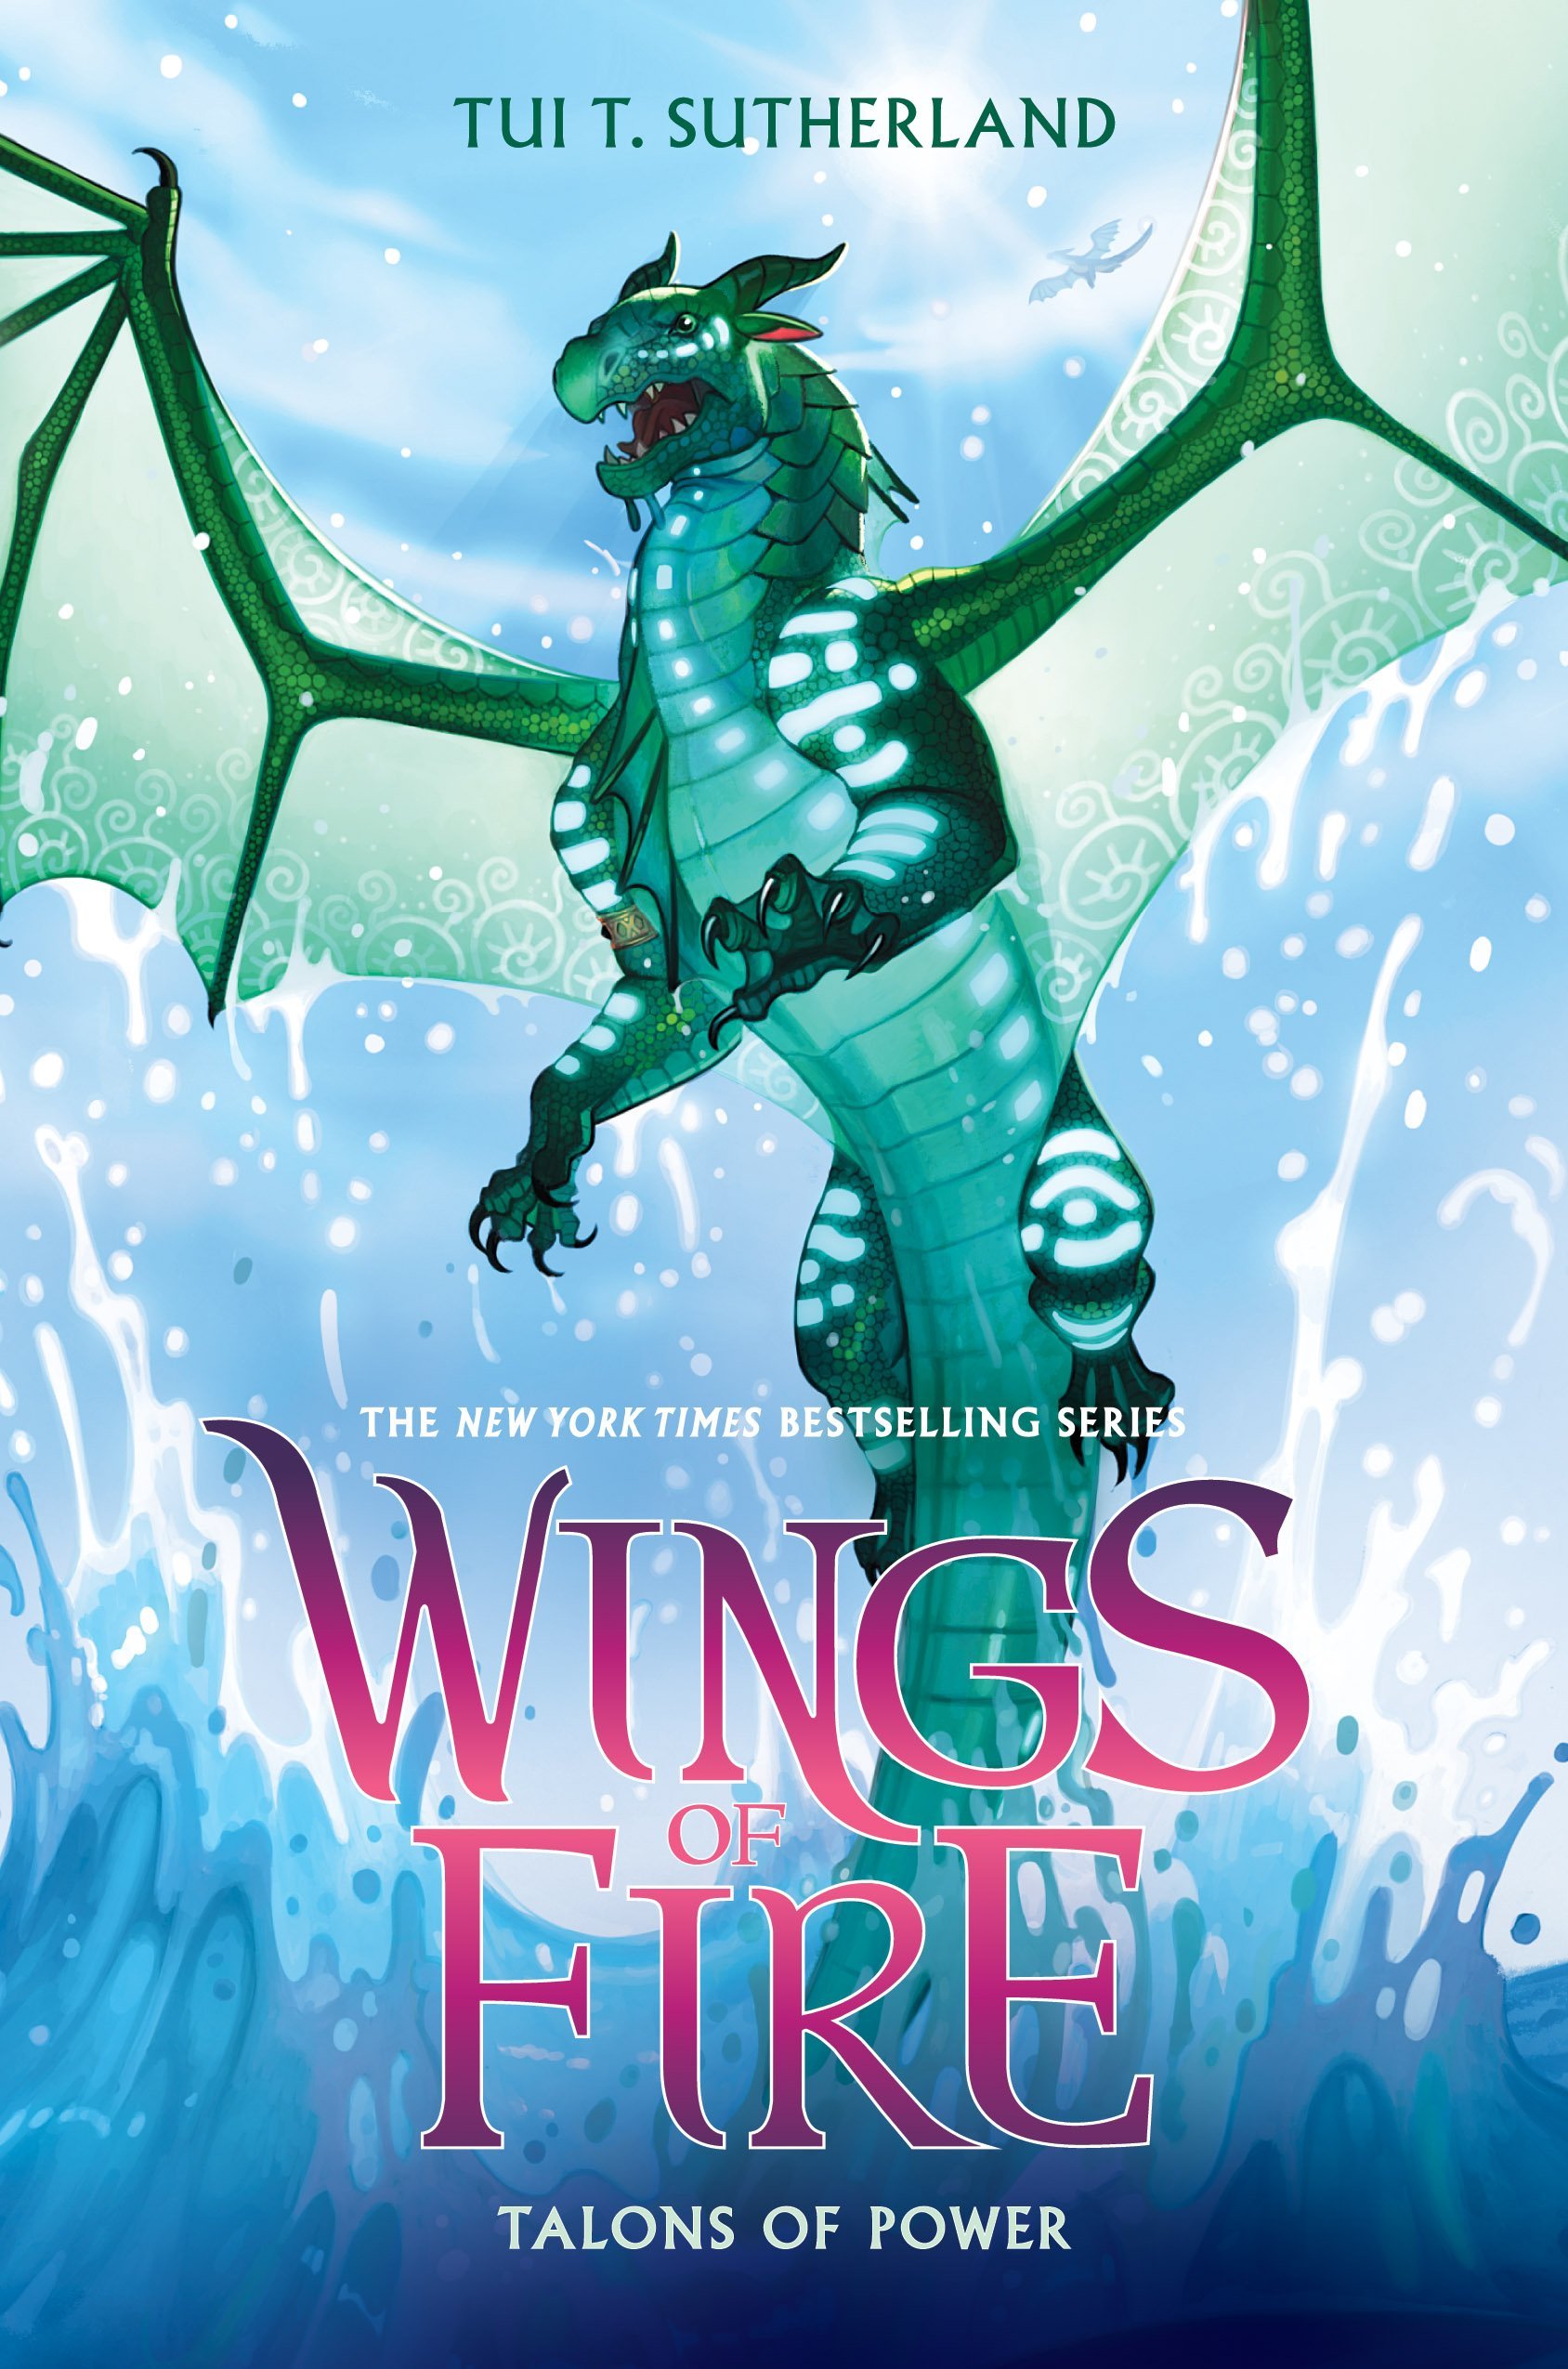 book review on book wings of fire